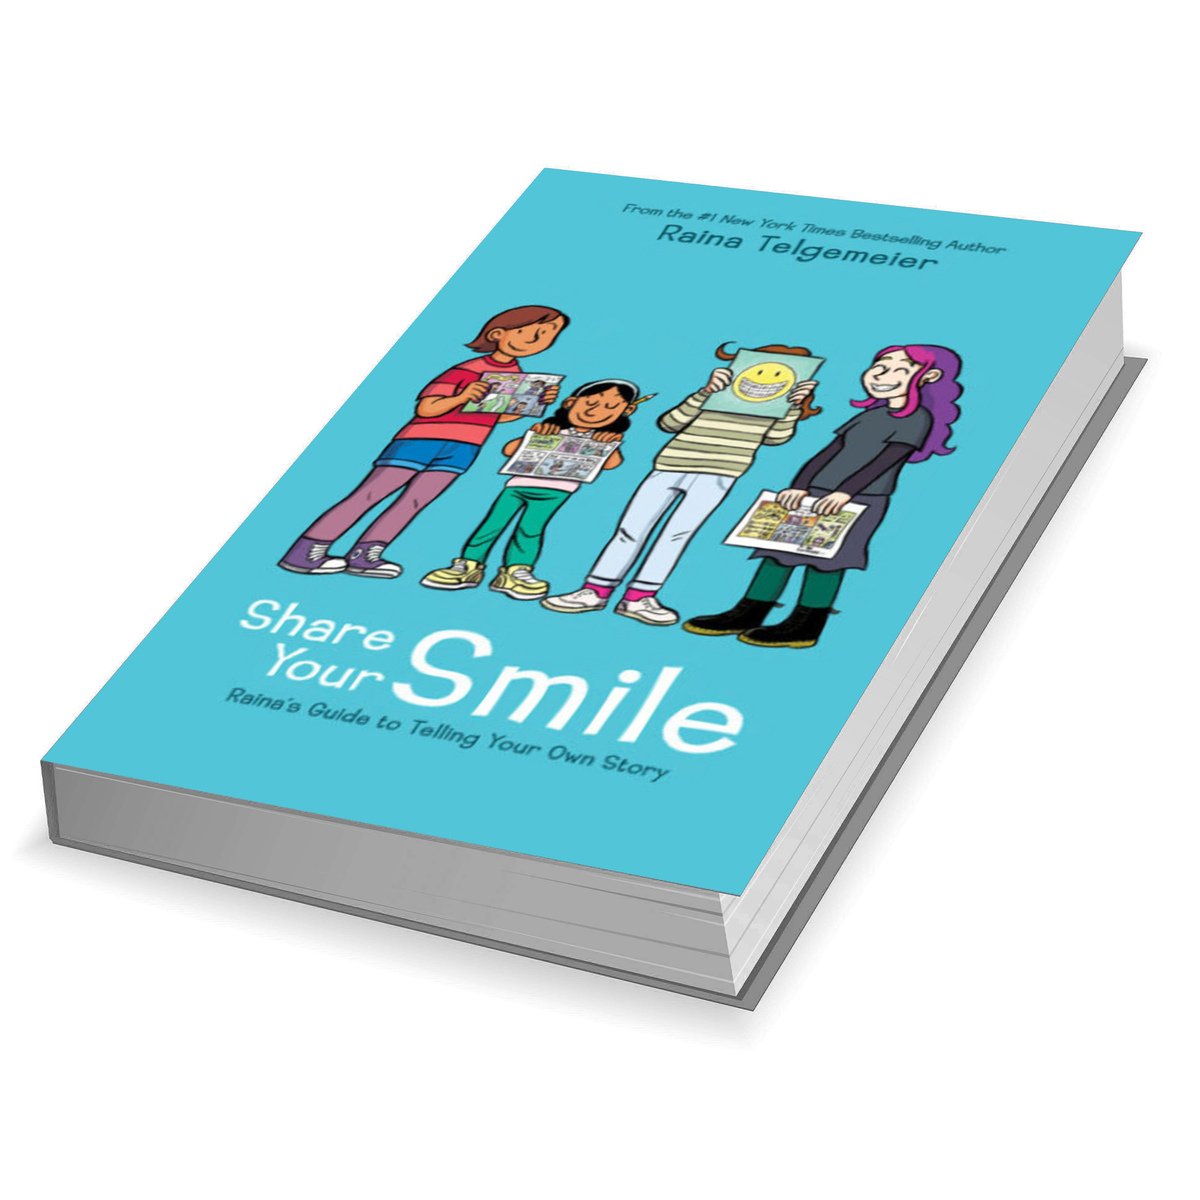 Share Your Smile: Raina'S Guide To Telling Your Own Story